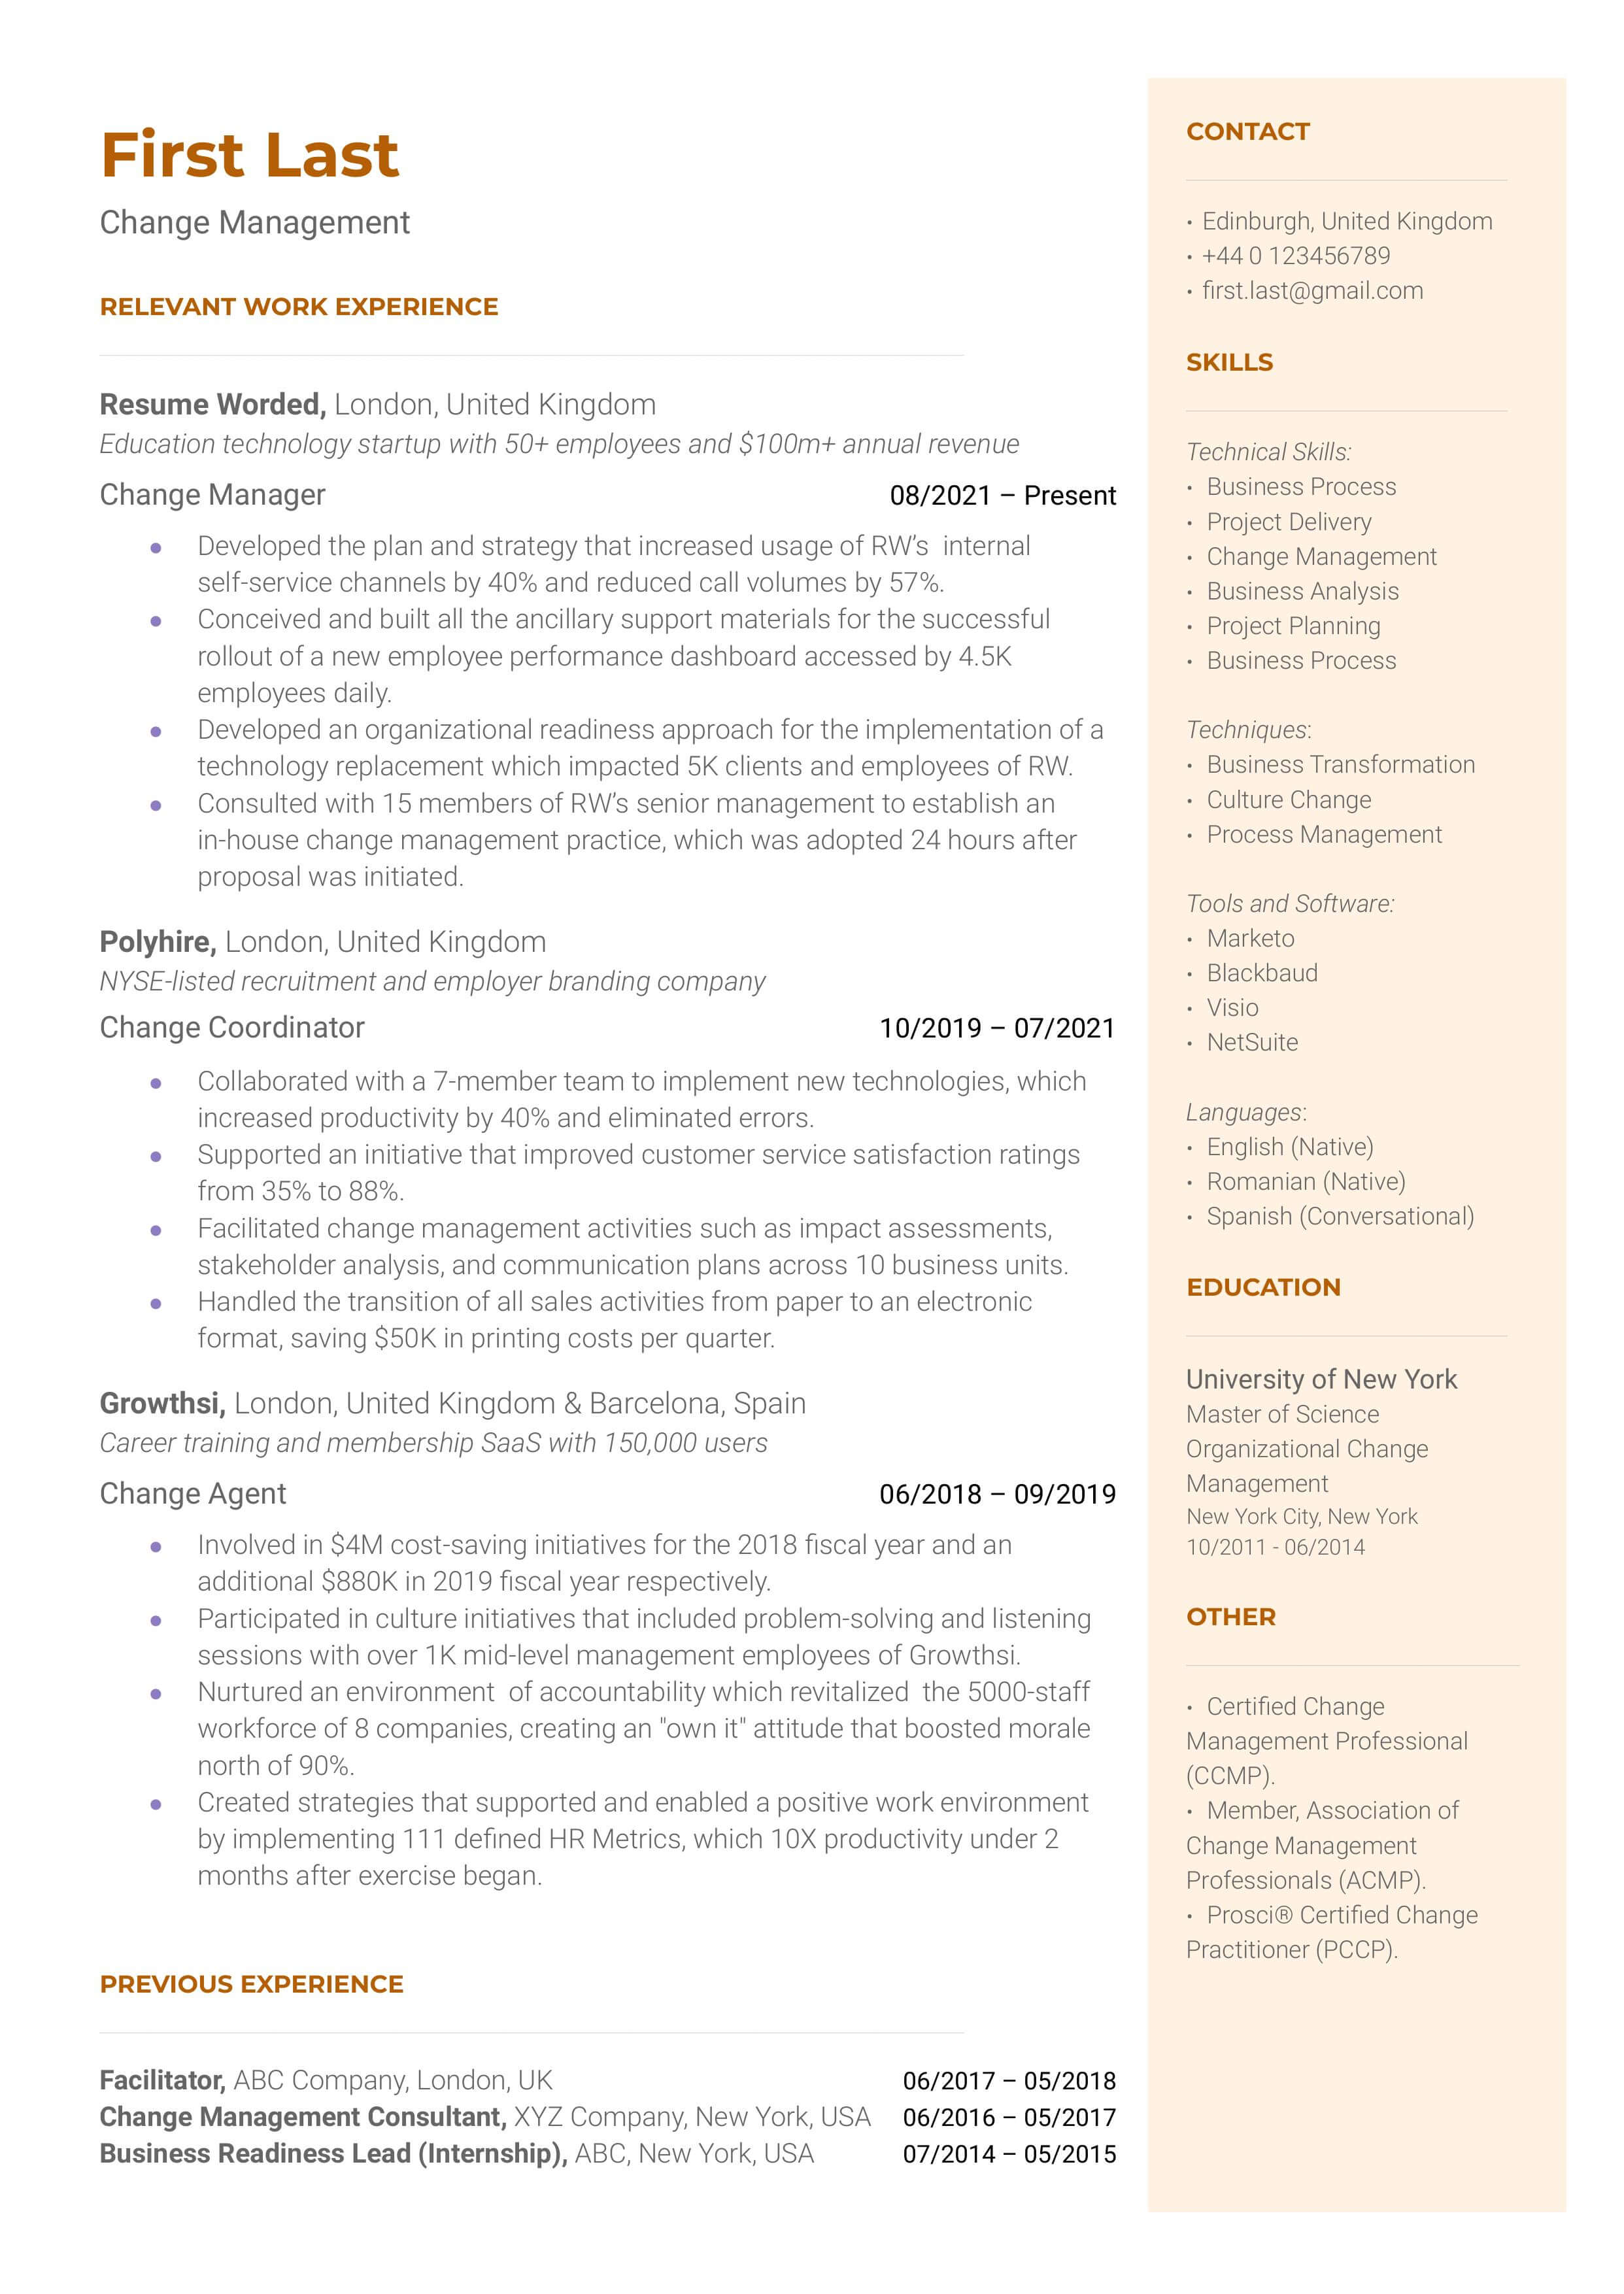 A change manager resume sample that highlights the applicant's quantifiable success and experience.